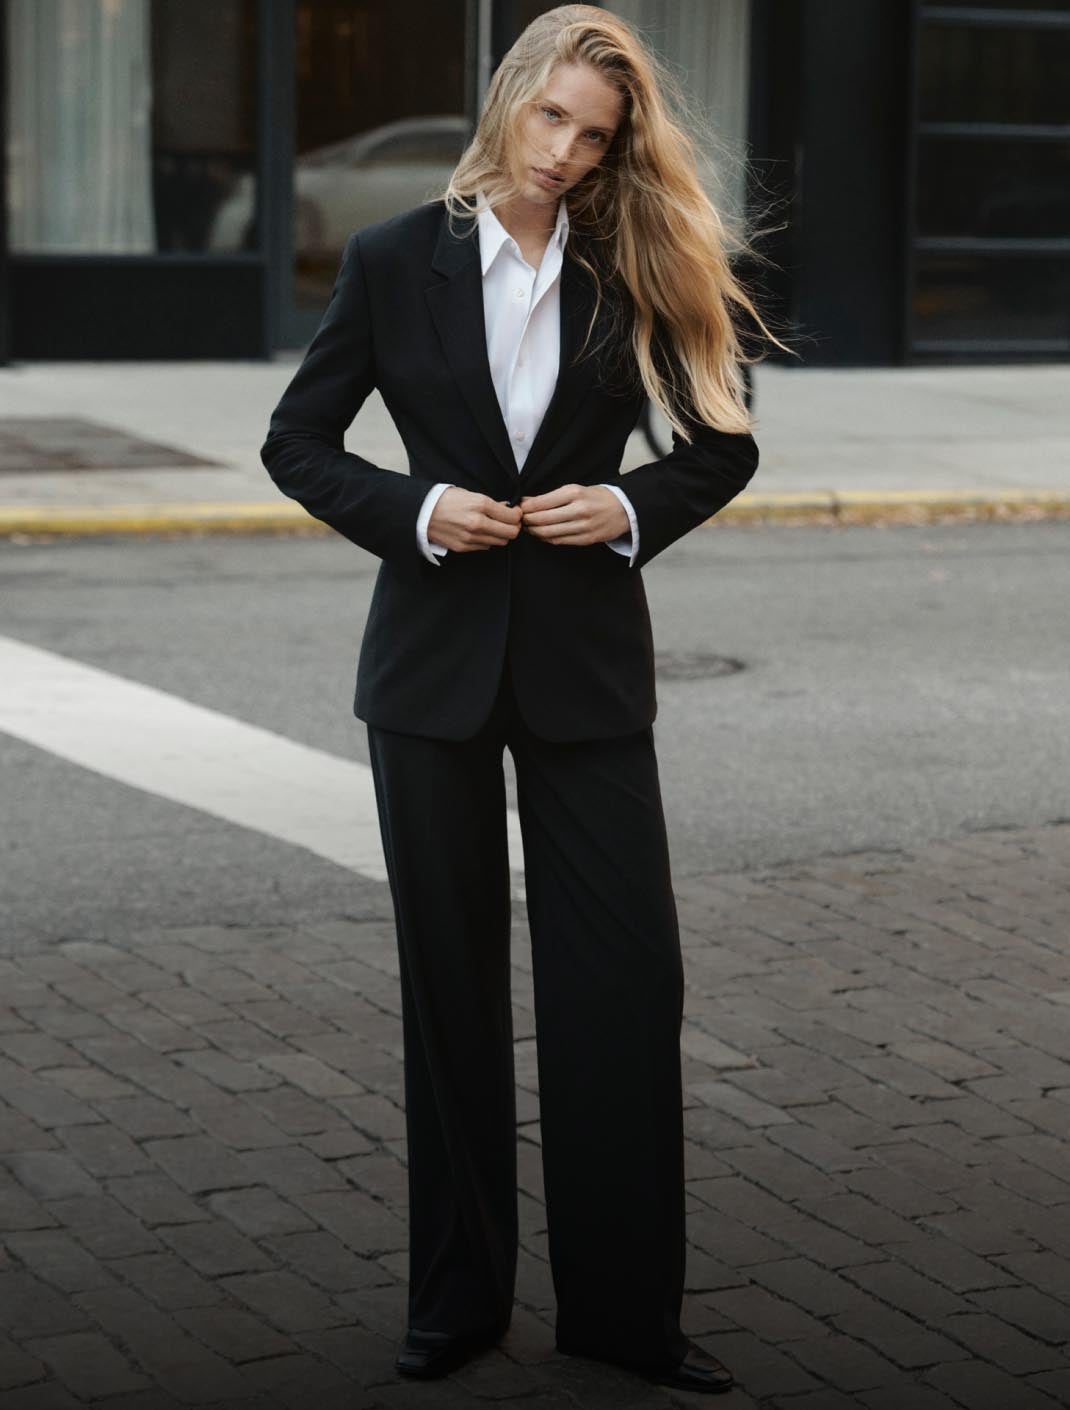 The 10 Best Women's Pant Suits For Every Social Event